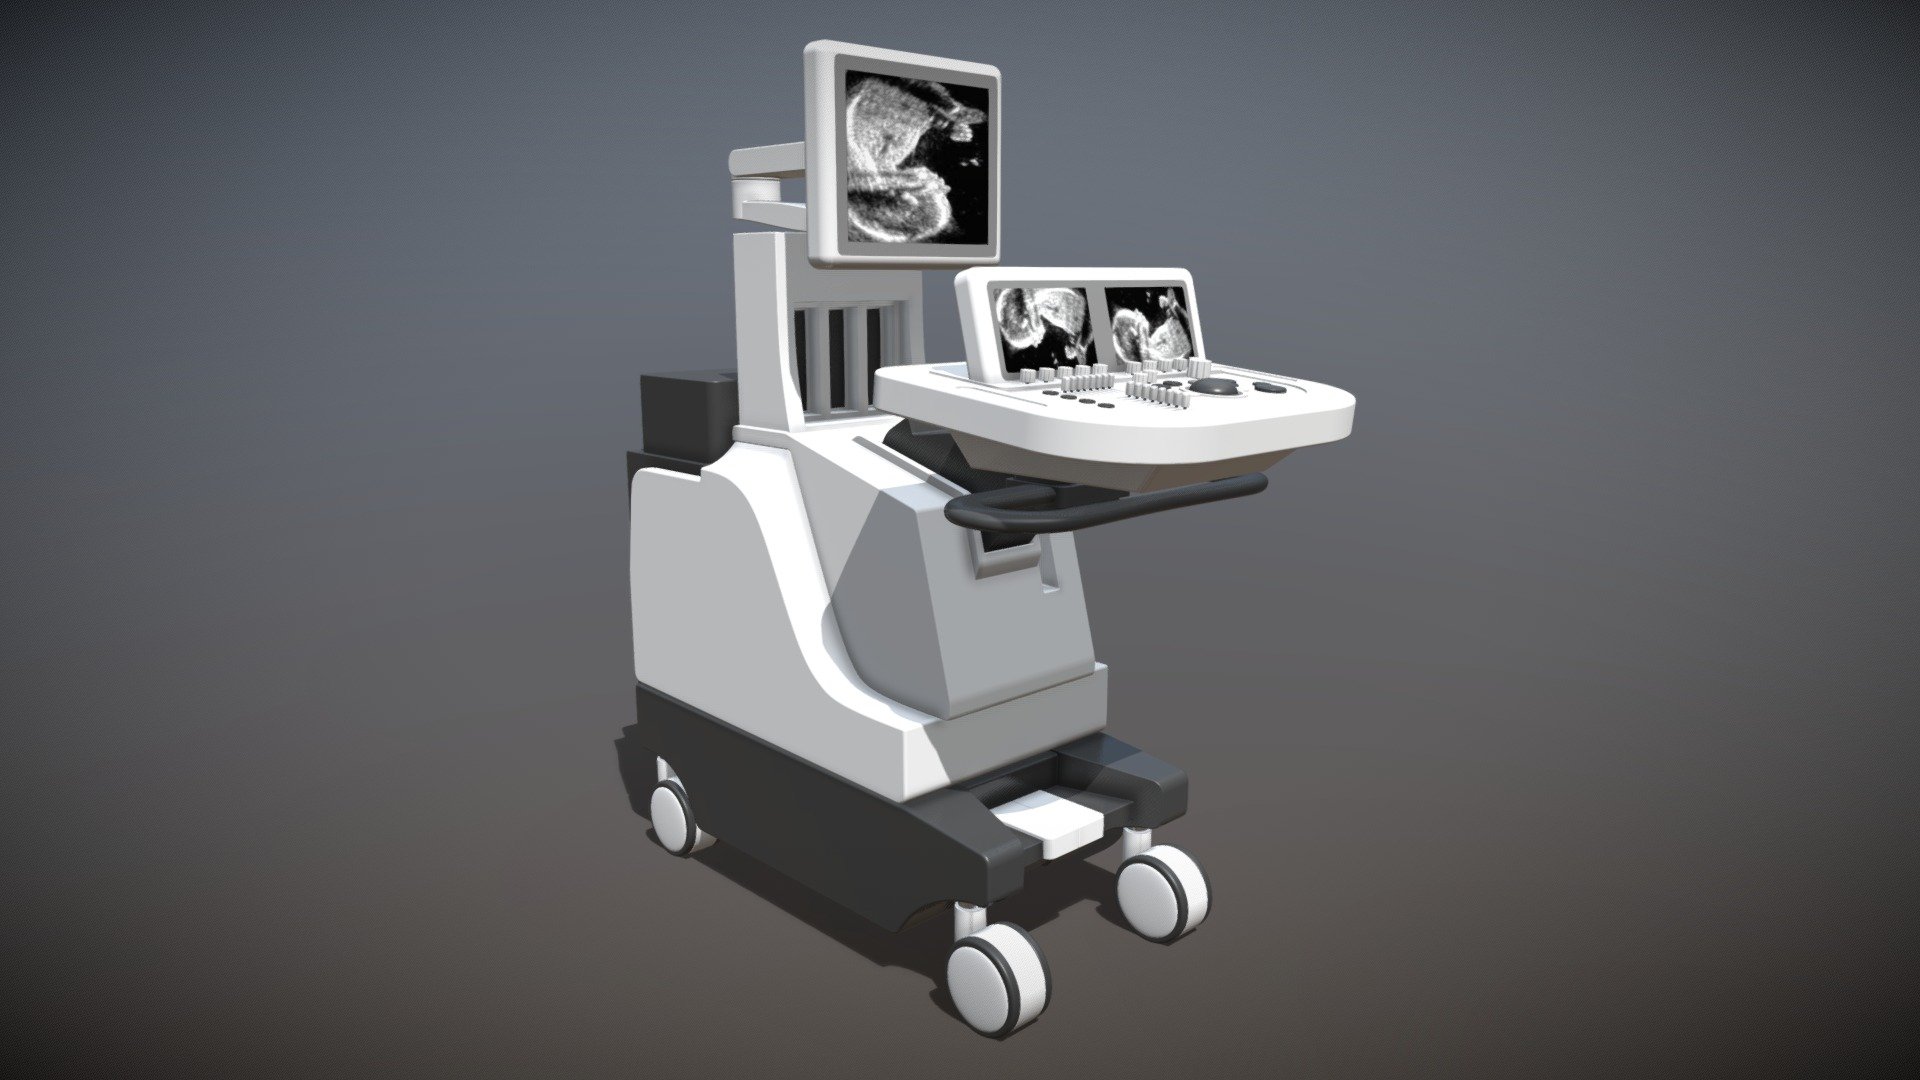 This is a standard hospital forniture, exactly a ultrasound with two monitors and an additional rotatable monitor 3d model